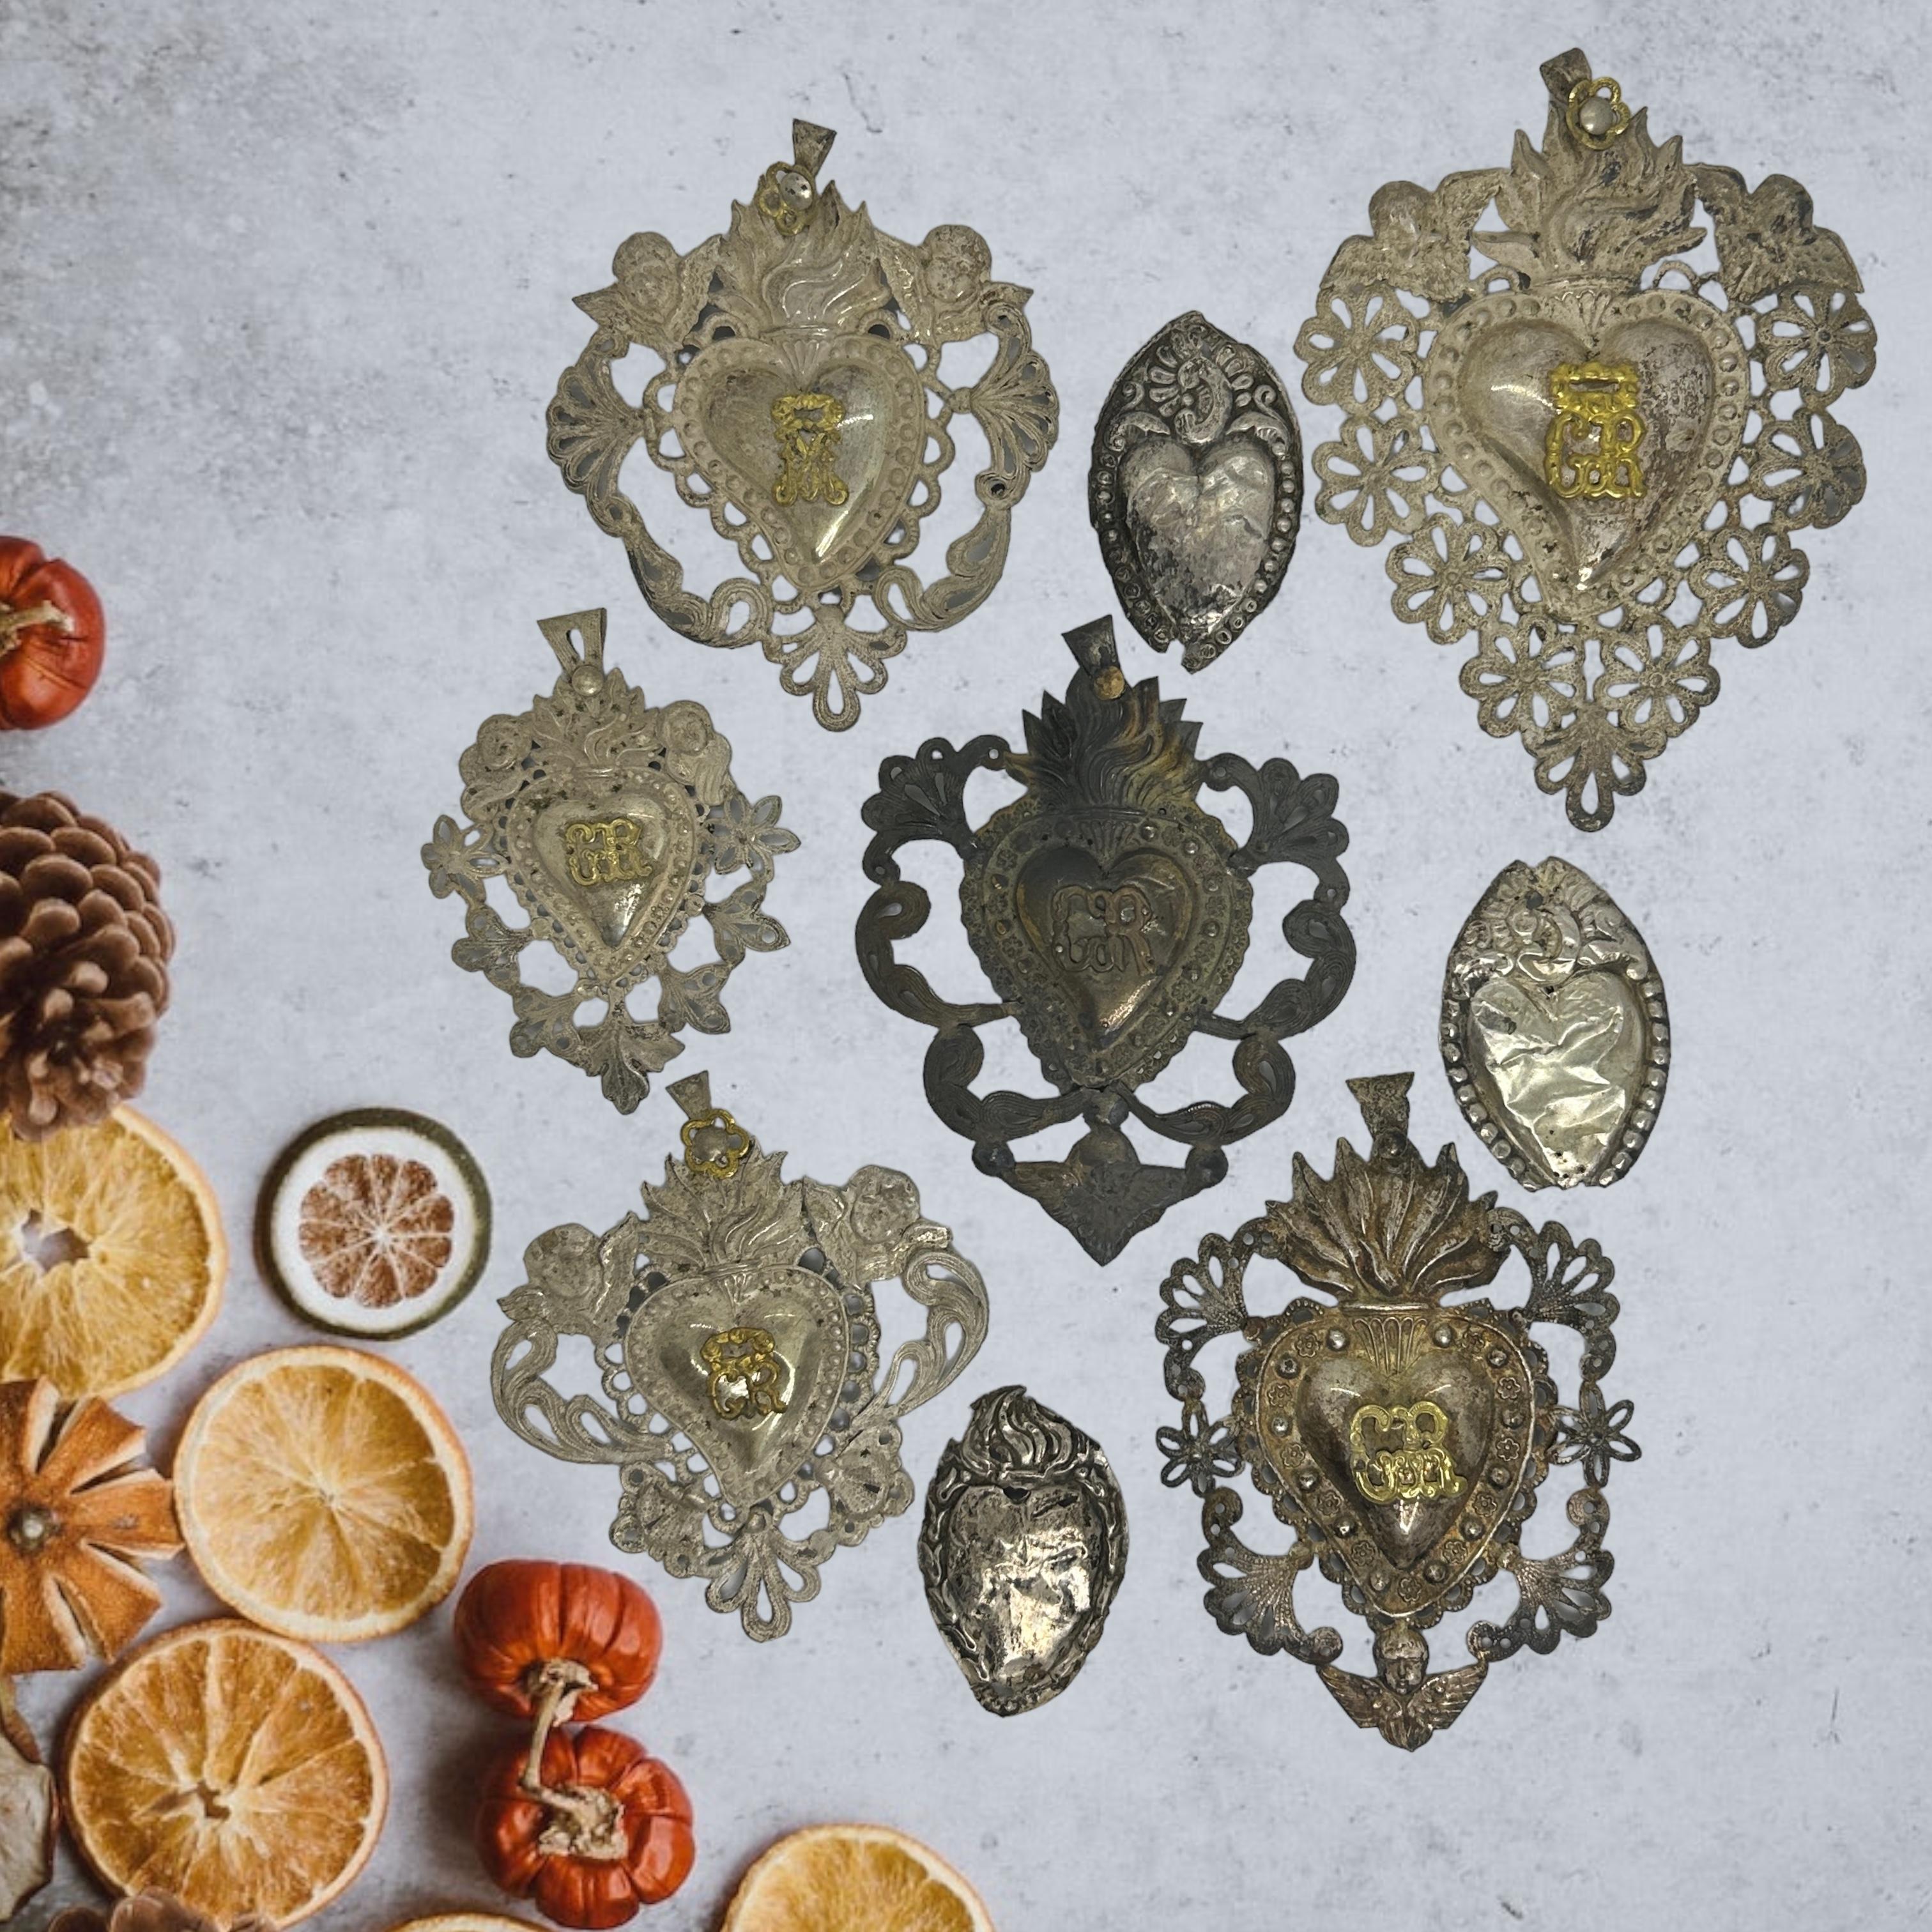 A collection of nine cute petite religious Ex Voto. I do not know what it is made of, thin and light filigree silver or silver plated metal. Each is handmade, embossed and then welded. Given the delicacy, I did not try to remove the tarnish and I